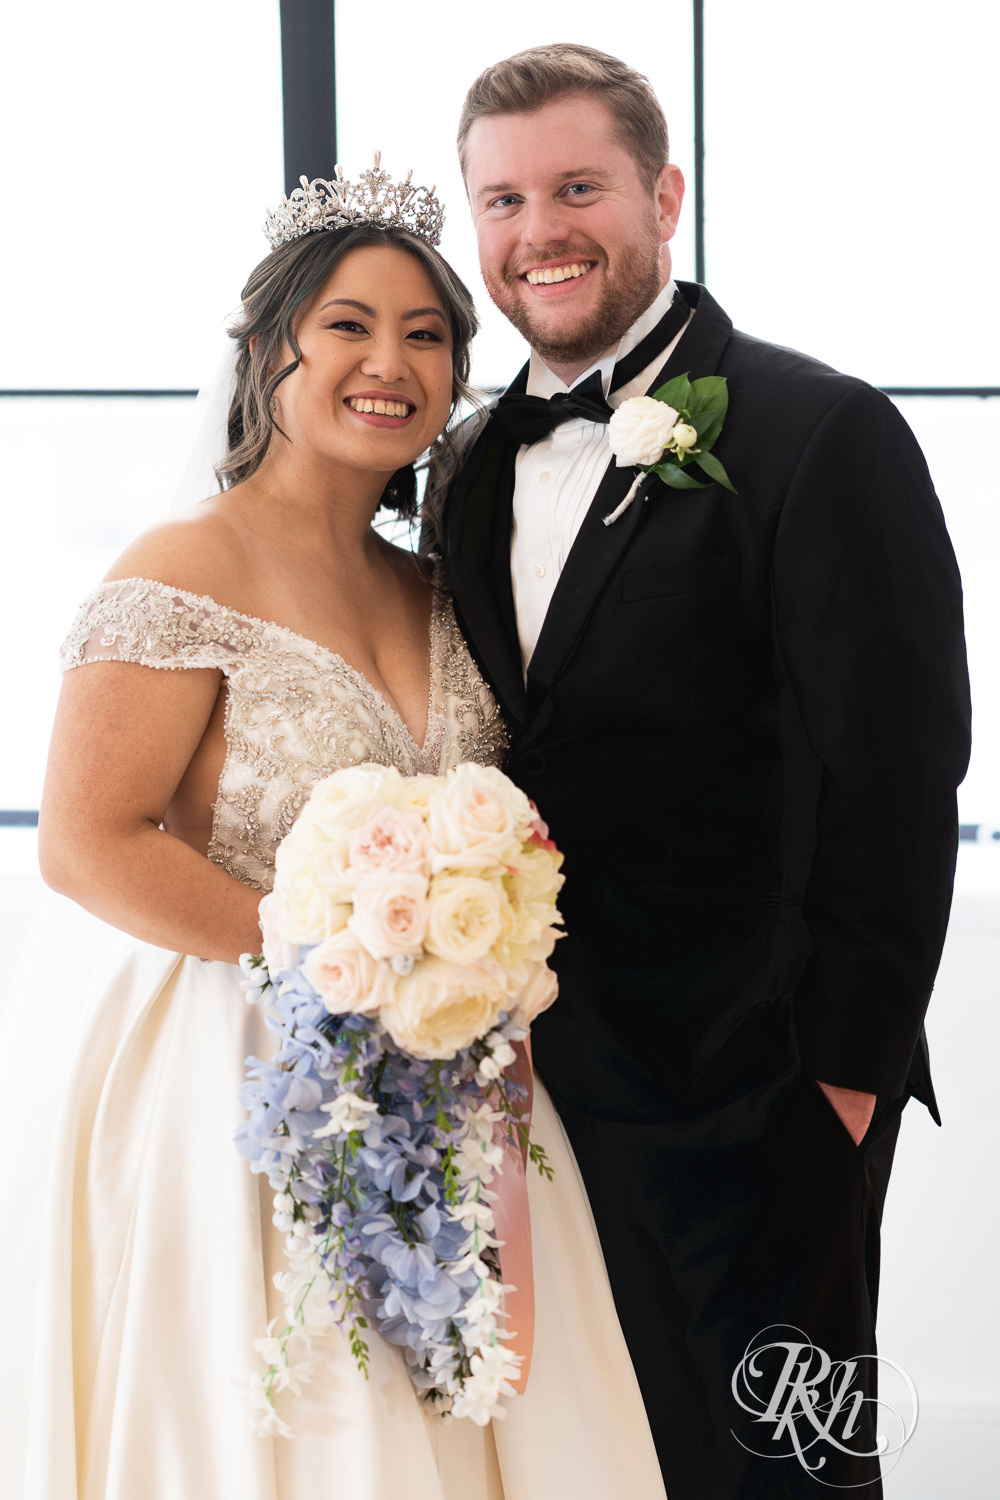 Hmong bride and groom smile on wedding day at the Saint Paul Athletic Club in Saint Paul, Minnesota.